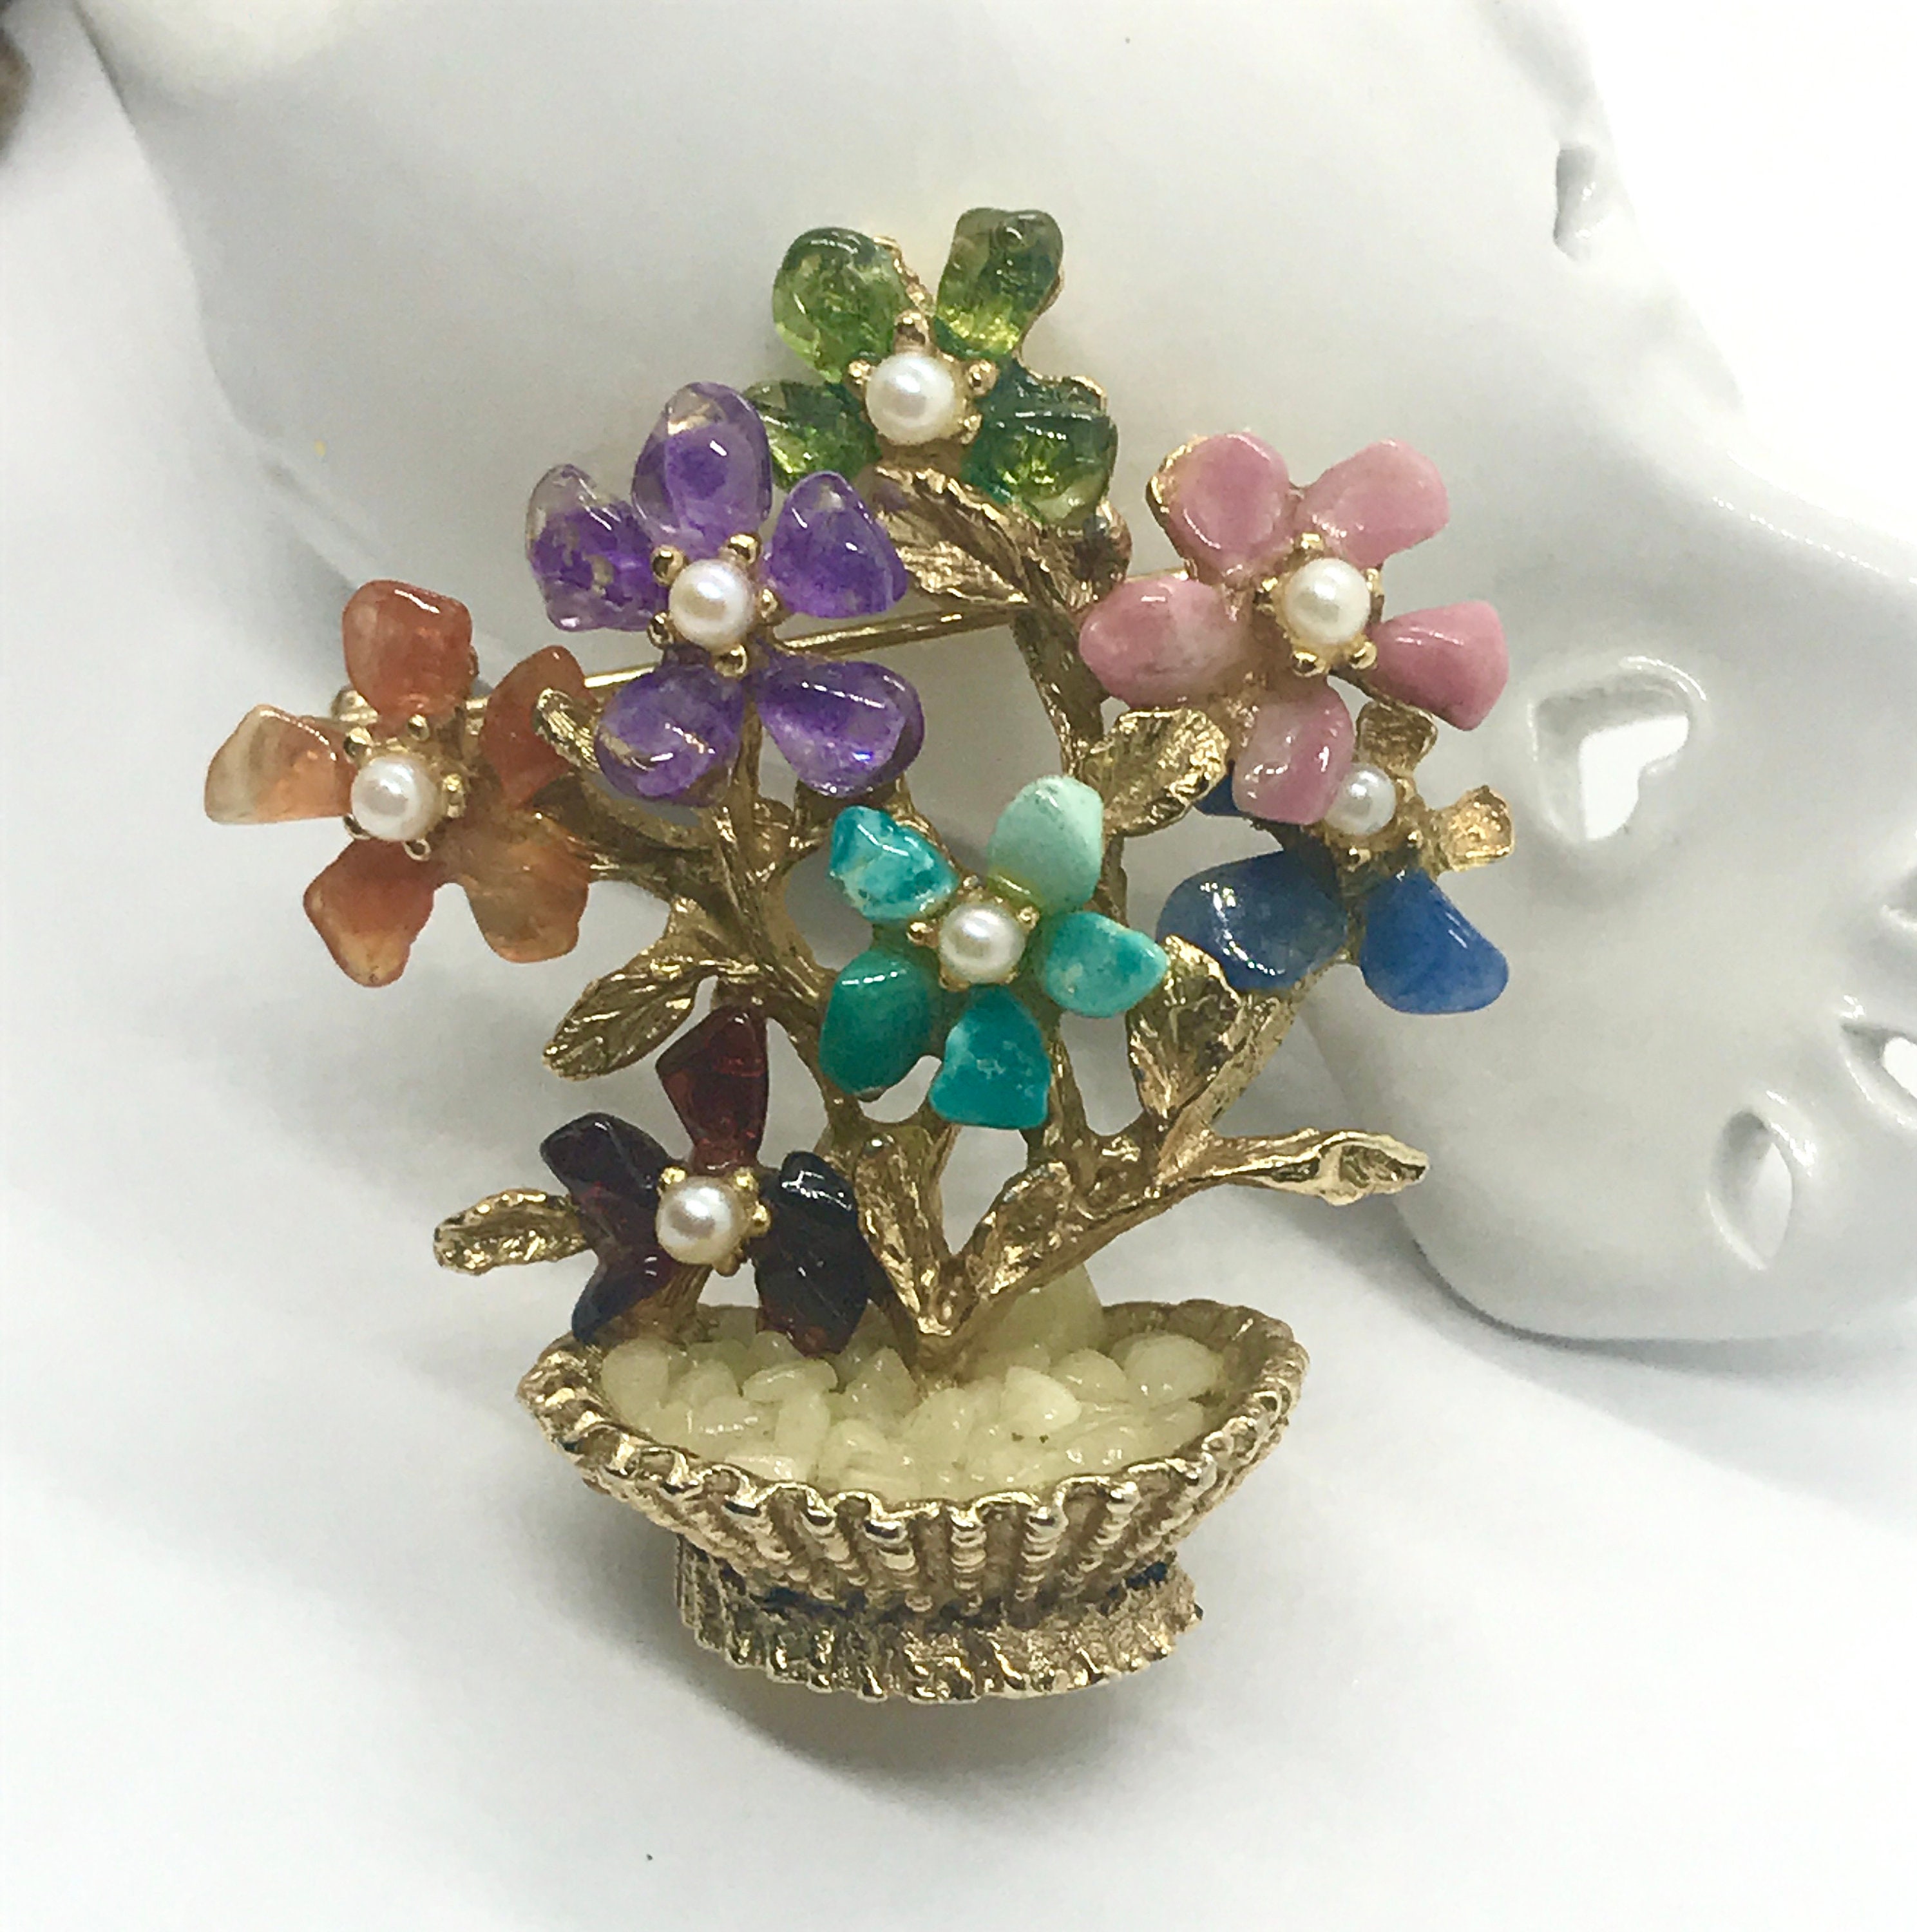 collectible pin Vintage floral pin bridal jewelry brooch bouquet oval unique pin pin flower pins flowers purple floral pin gift